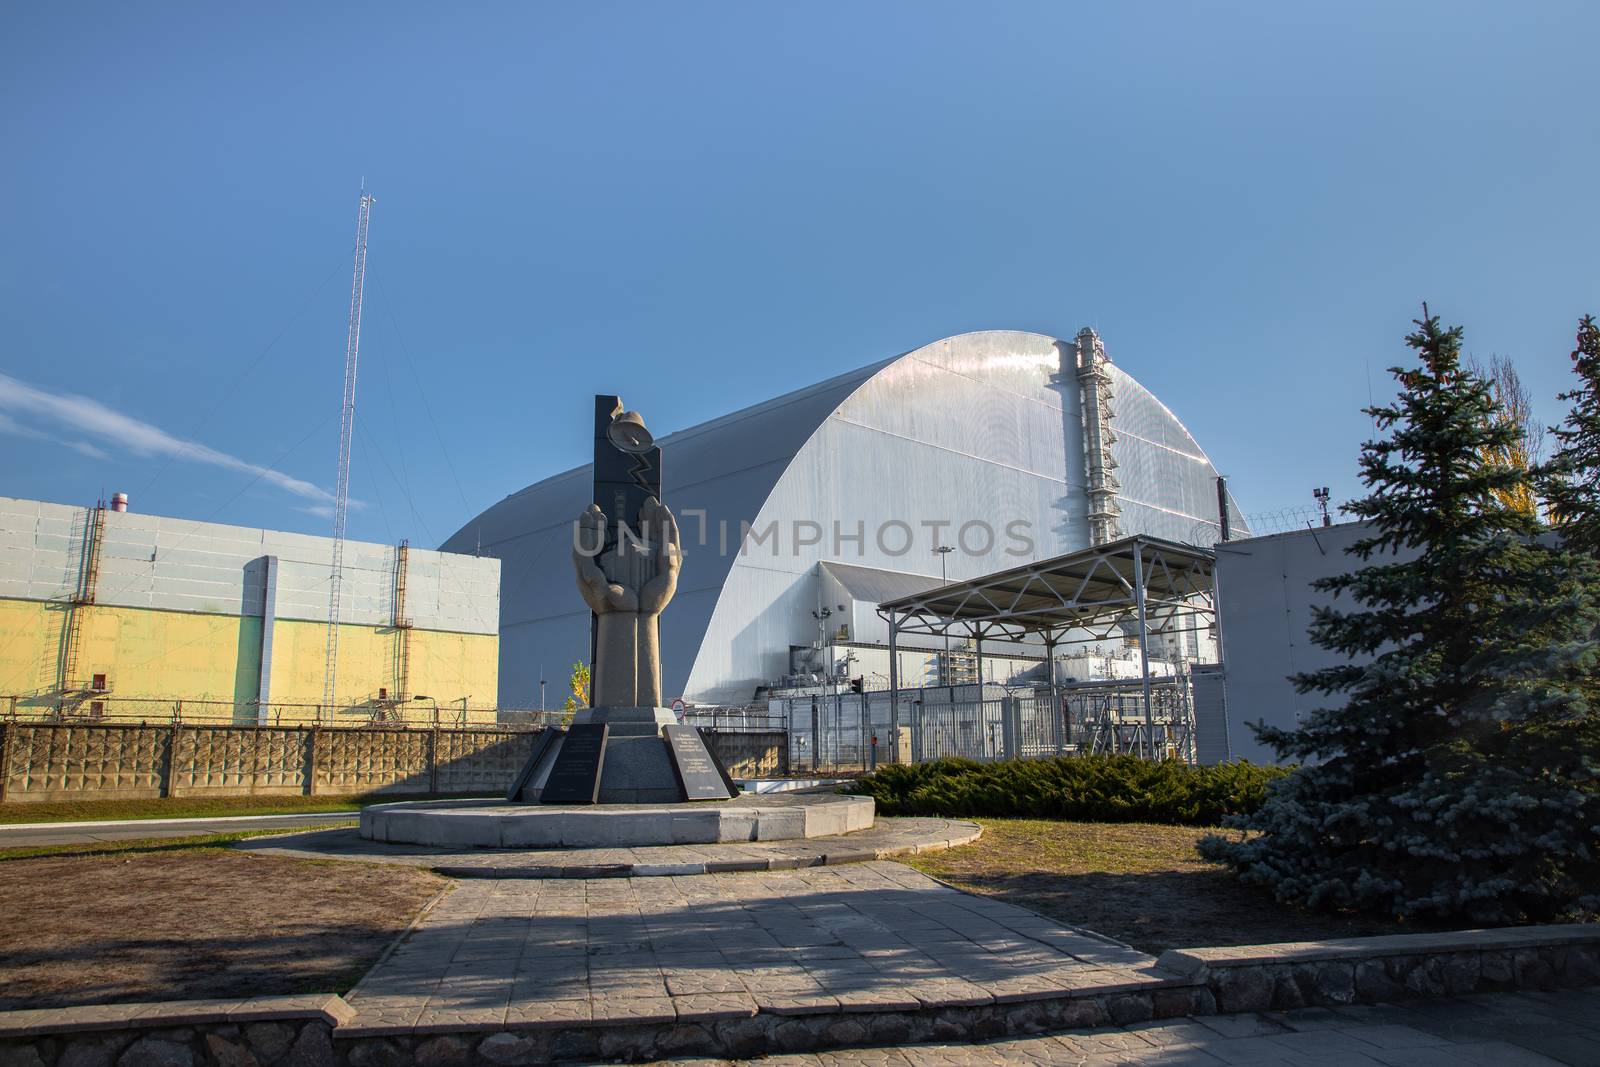 Chernobyl Nuclear power plant 2019 by svedoliver